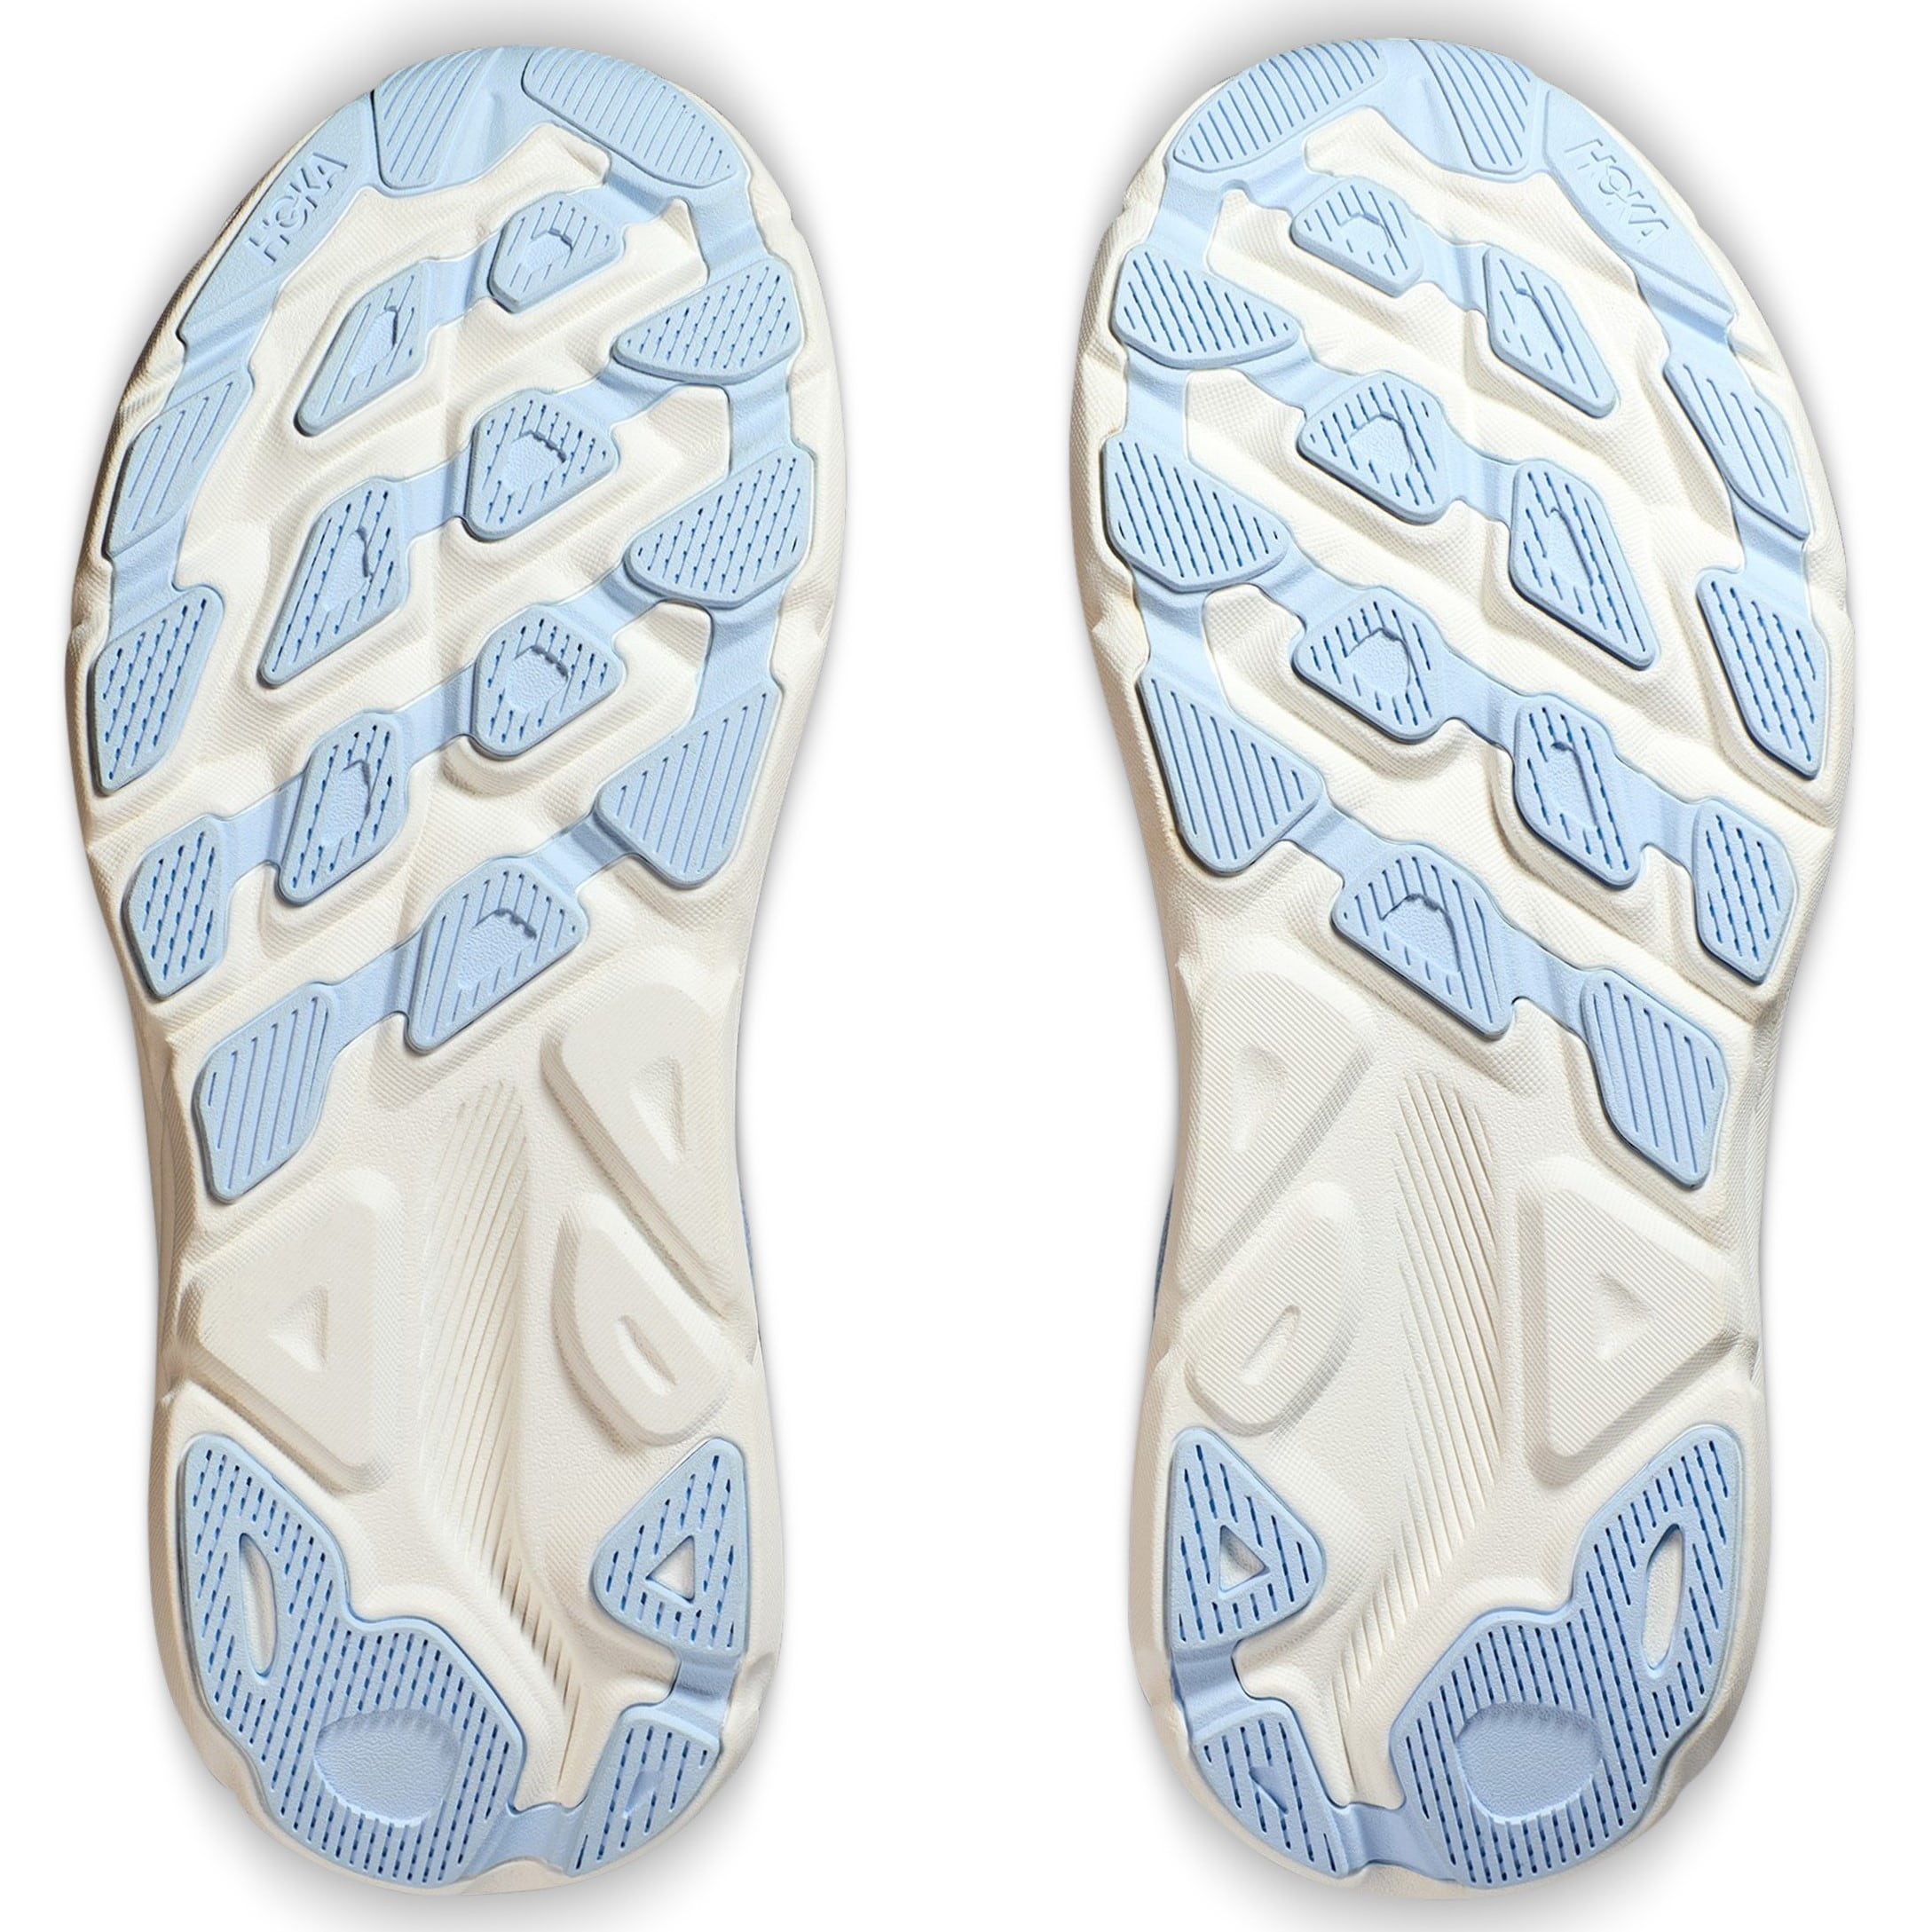 GIÀY HOKA NỮ CLIFTON 9 AIRY BLUE ICE WATER WOMEN ROAD RUNNING SHOES 1127896-ABIW 5